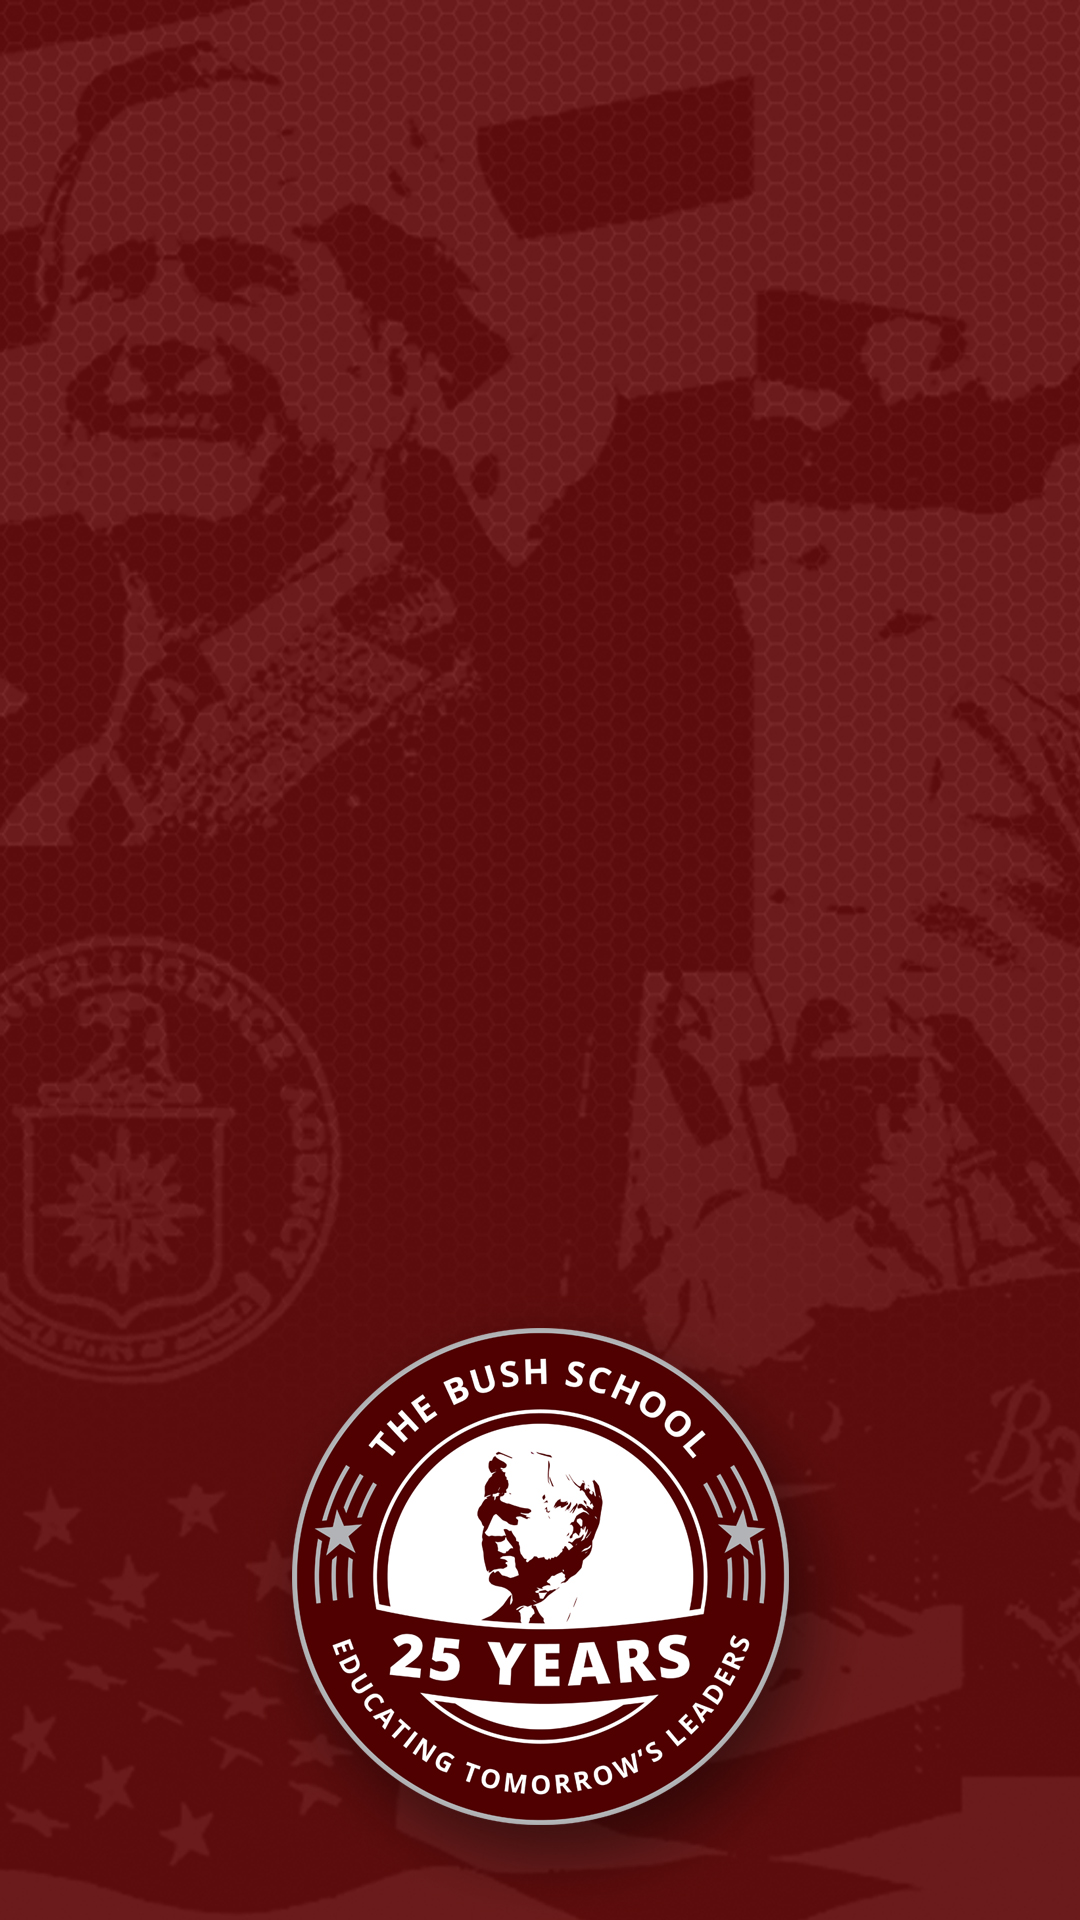 25th Anniversary - Primary logo on a maroon background - Phone Background